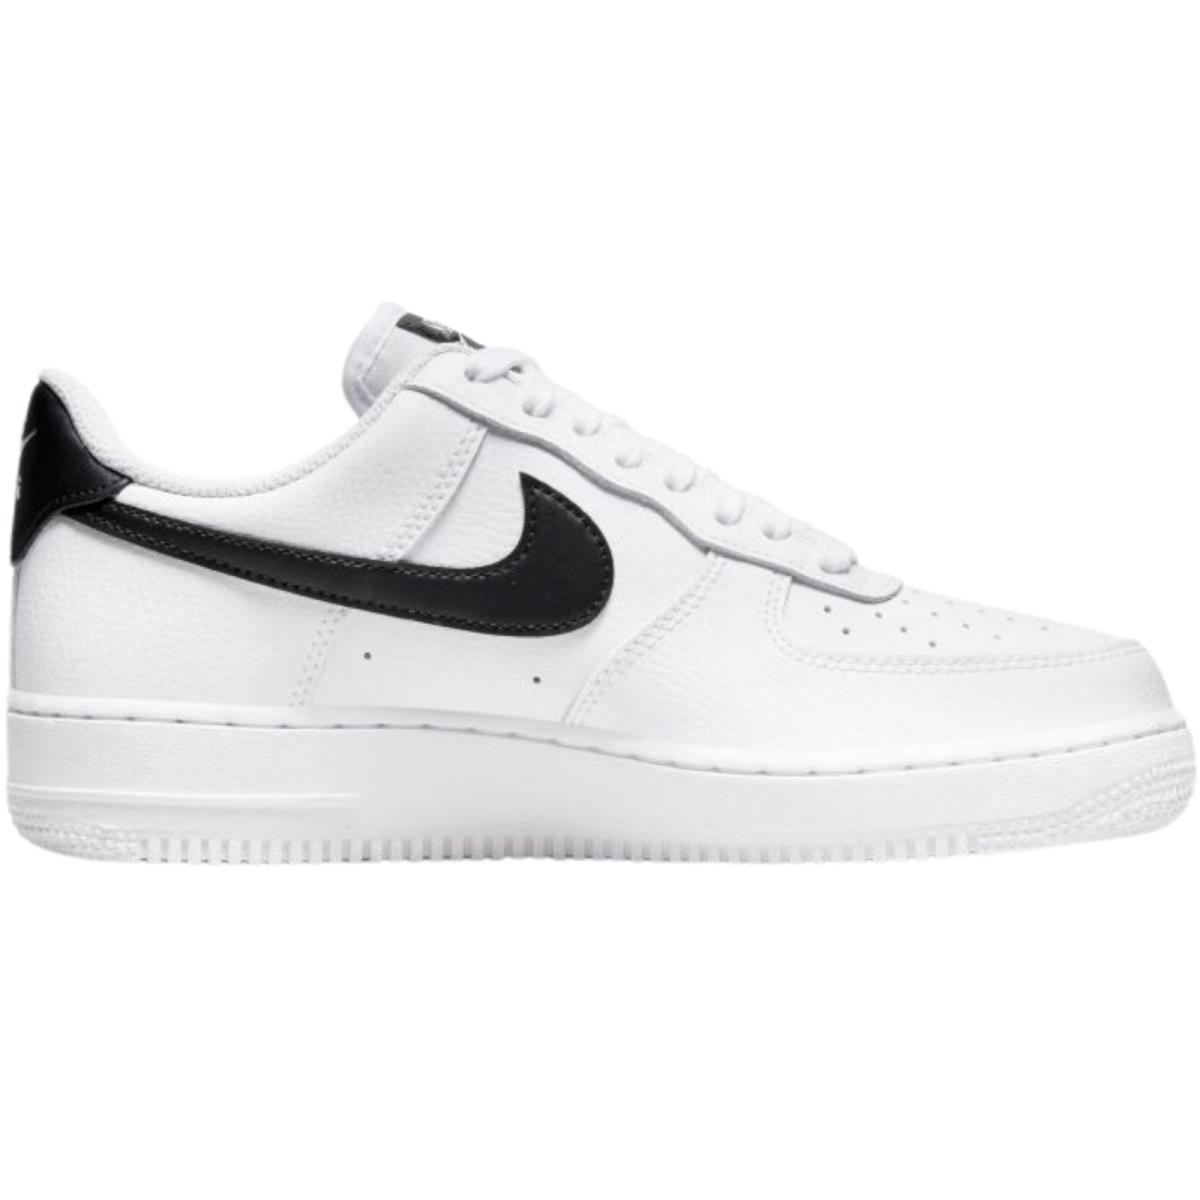 Nike Air Force 1 Women`s Casual Shoes All Colors US Sizes 6-11 Black/White